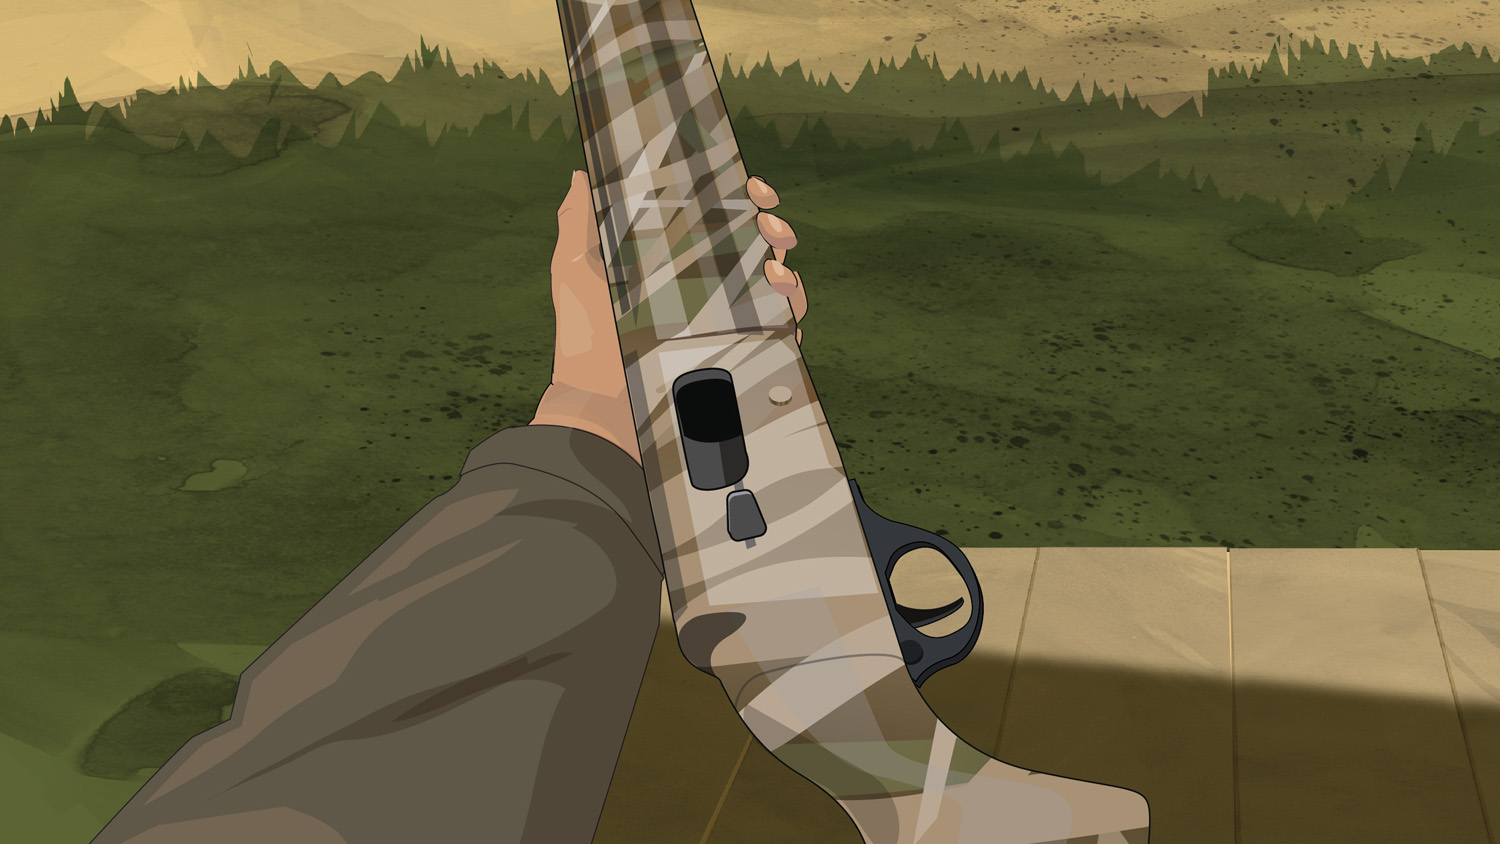 Illustration of a hunter's hands holding a semi-automatic action shotgun on its side with the action open.